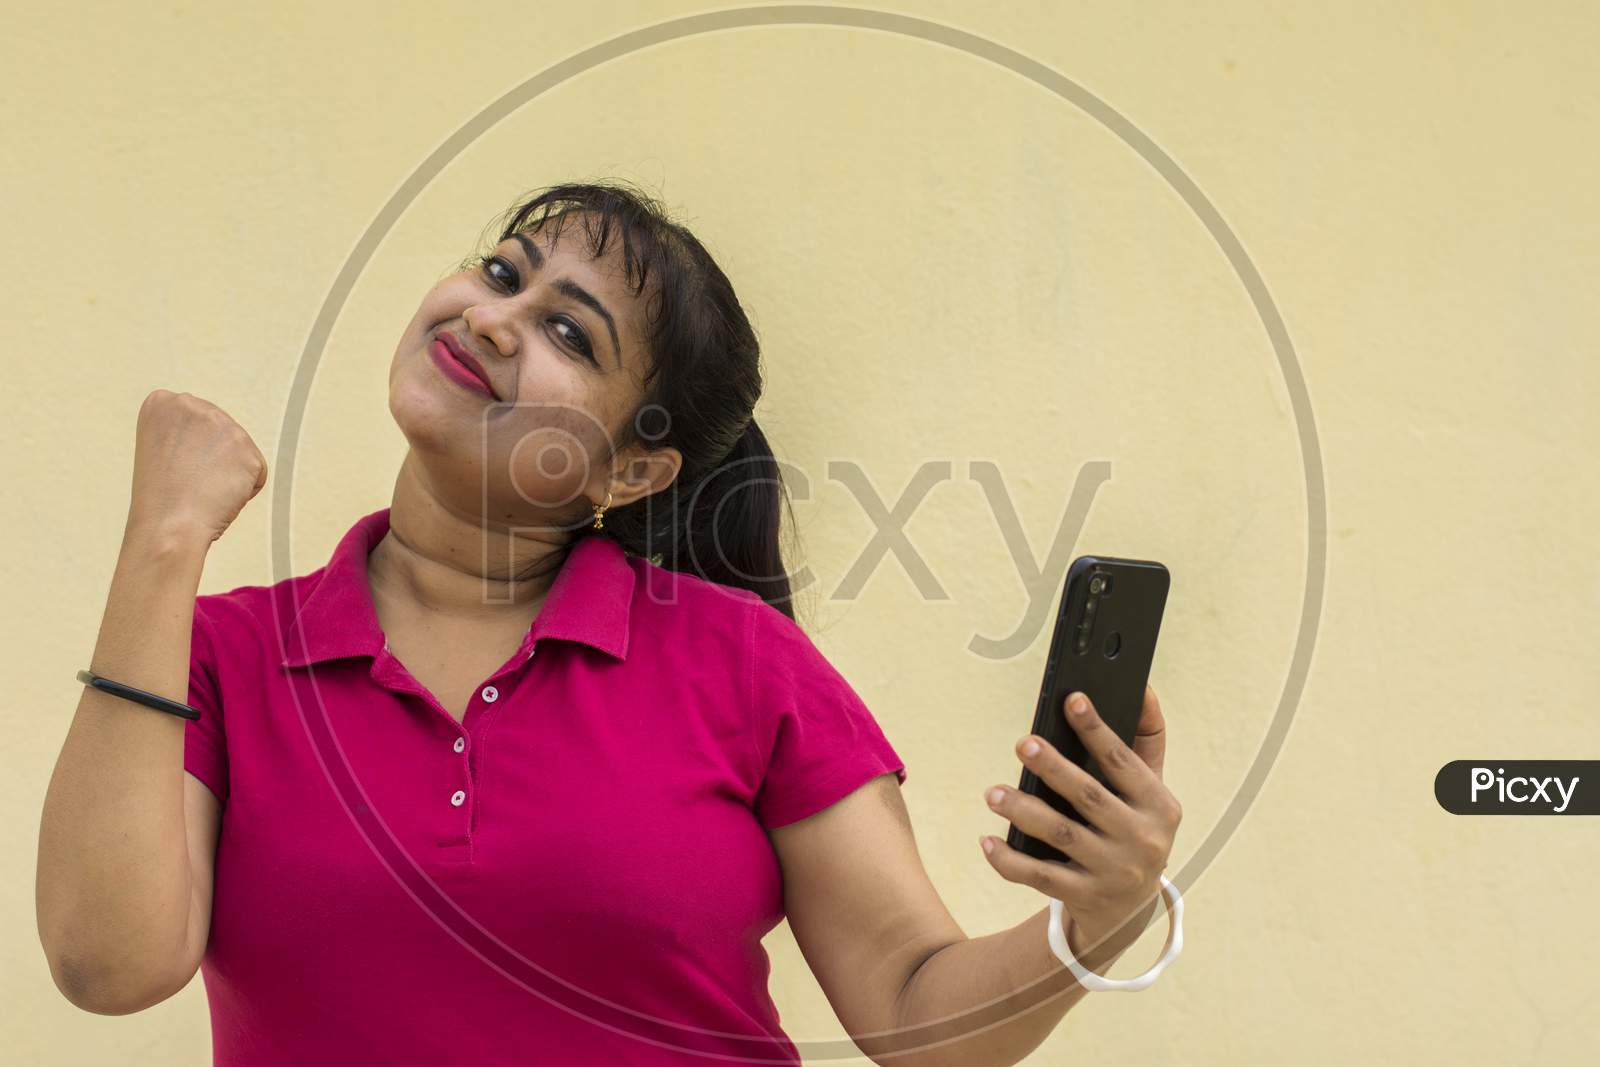 Indian Female Model Looking At Mobile Phone Happily With Slight Smiling Face In Yellow Background With Copy Space For Text